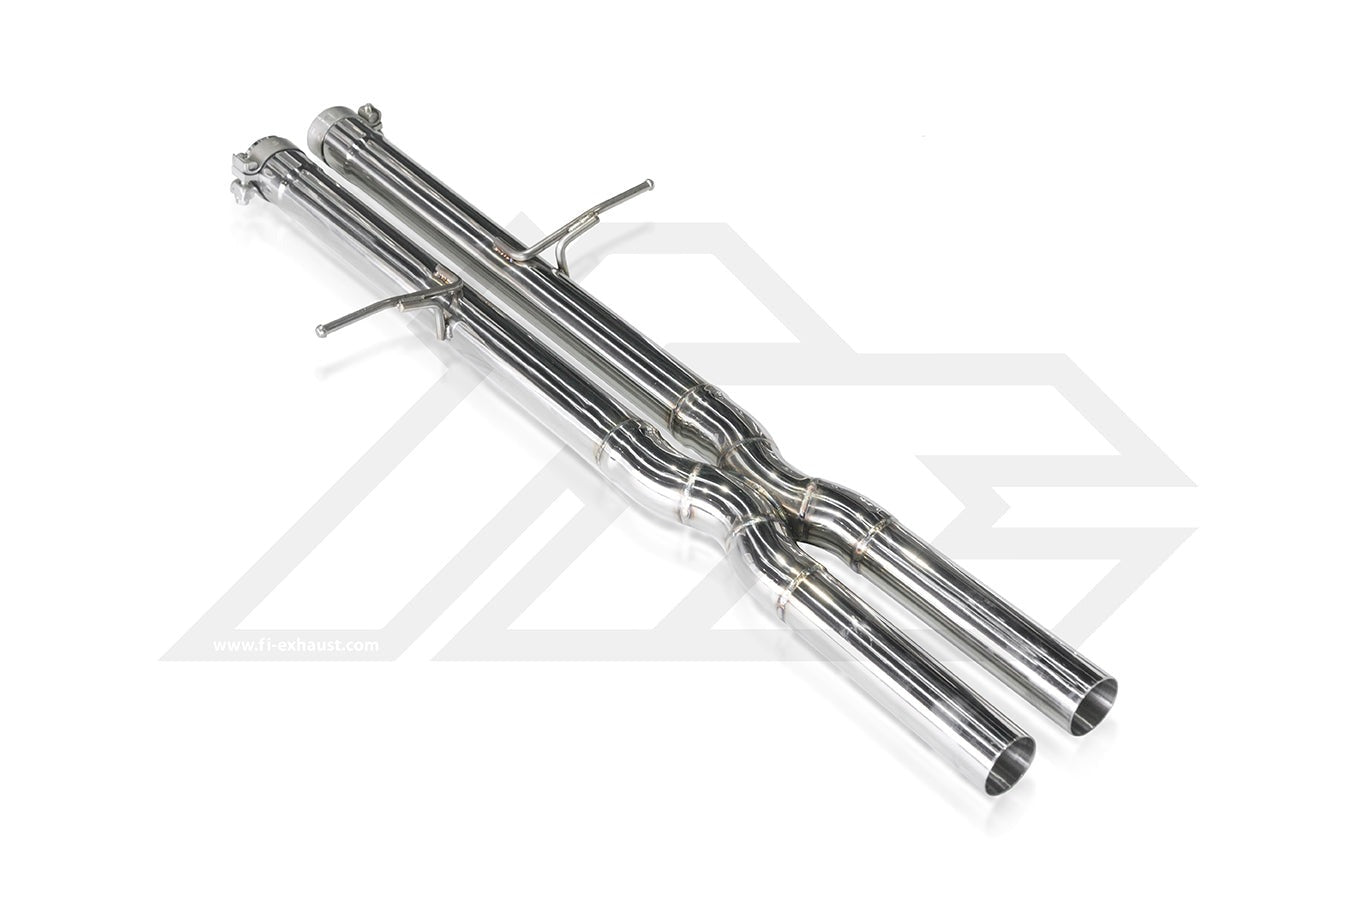 Fi Exhaust Valvetronic Exhaust System For Range Rover SV Autobiography L405 5.0 Supercharged V8 17-22